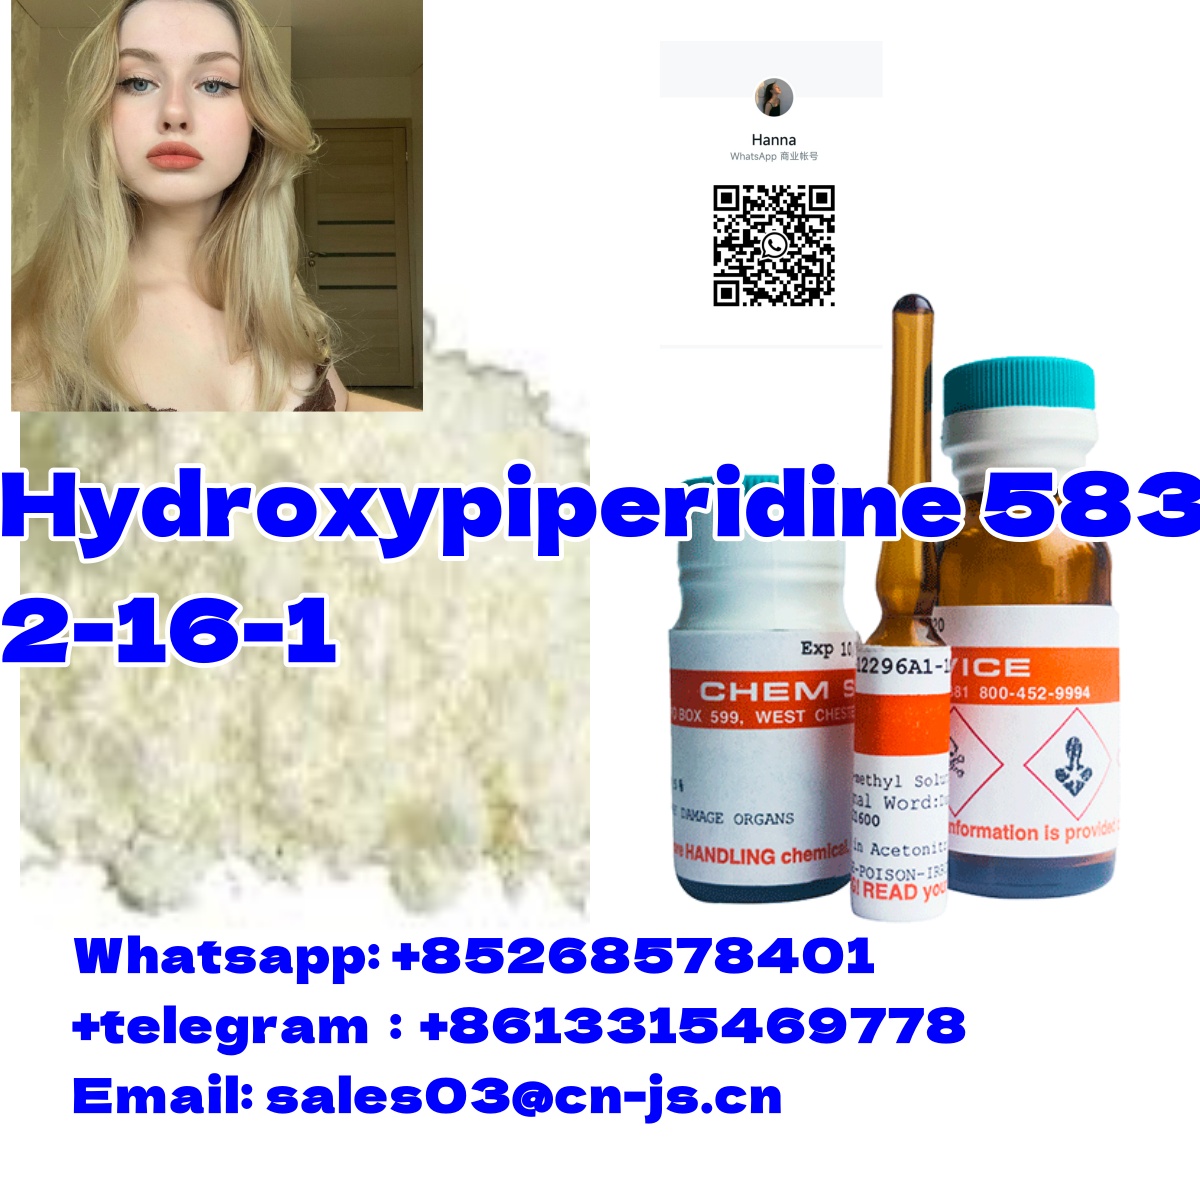 factory Outlet Hydroxypiperidine 5832－16－1,11,Cars,Cars